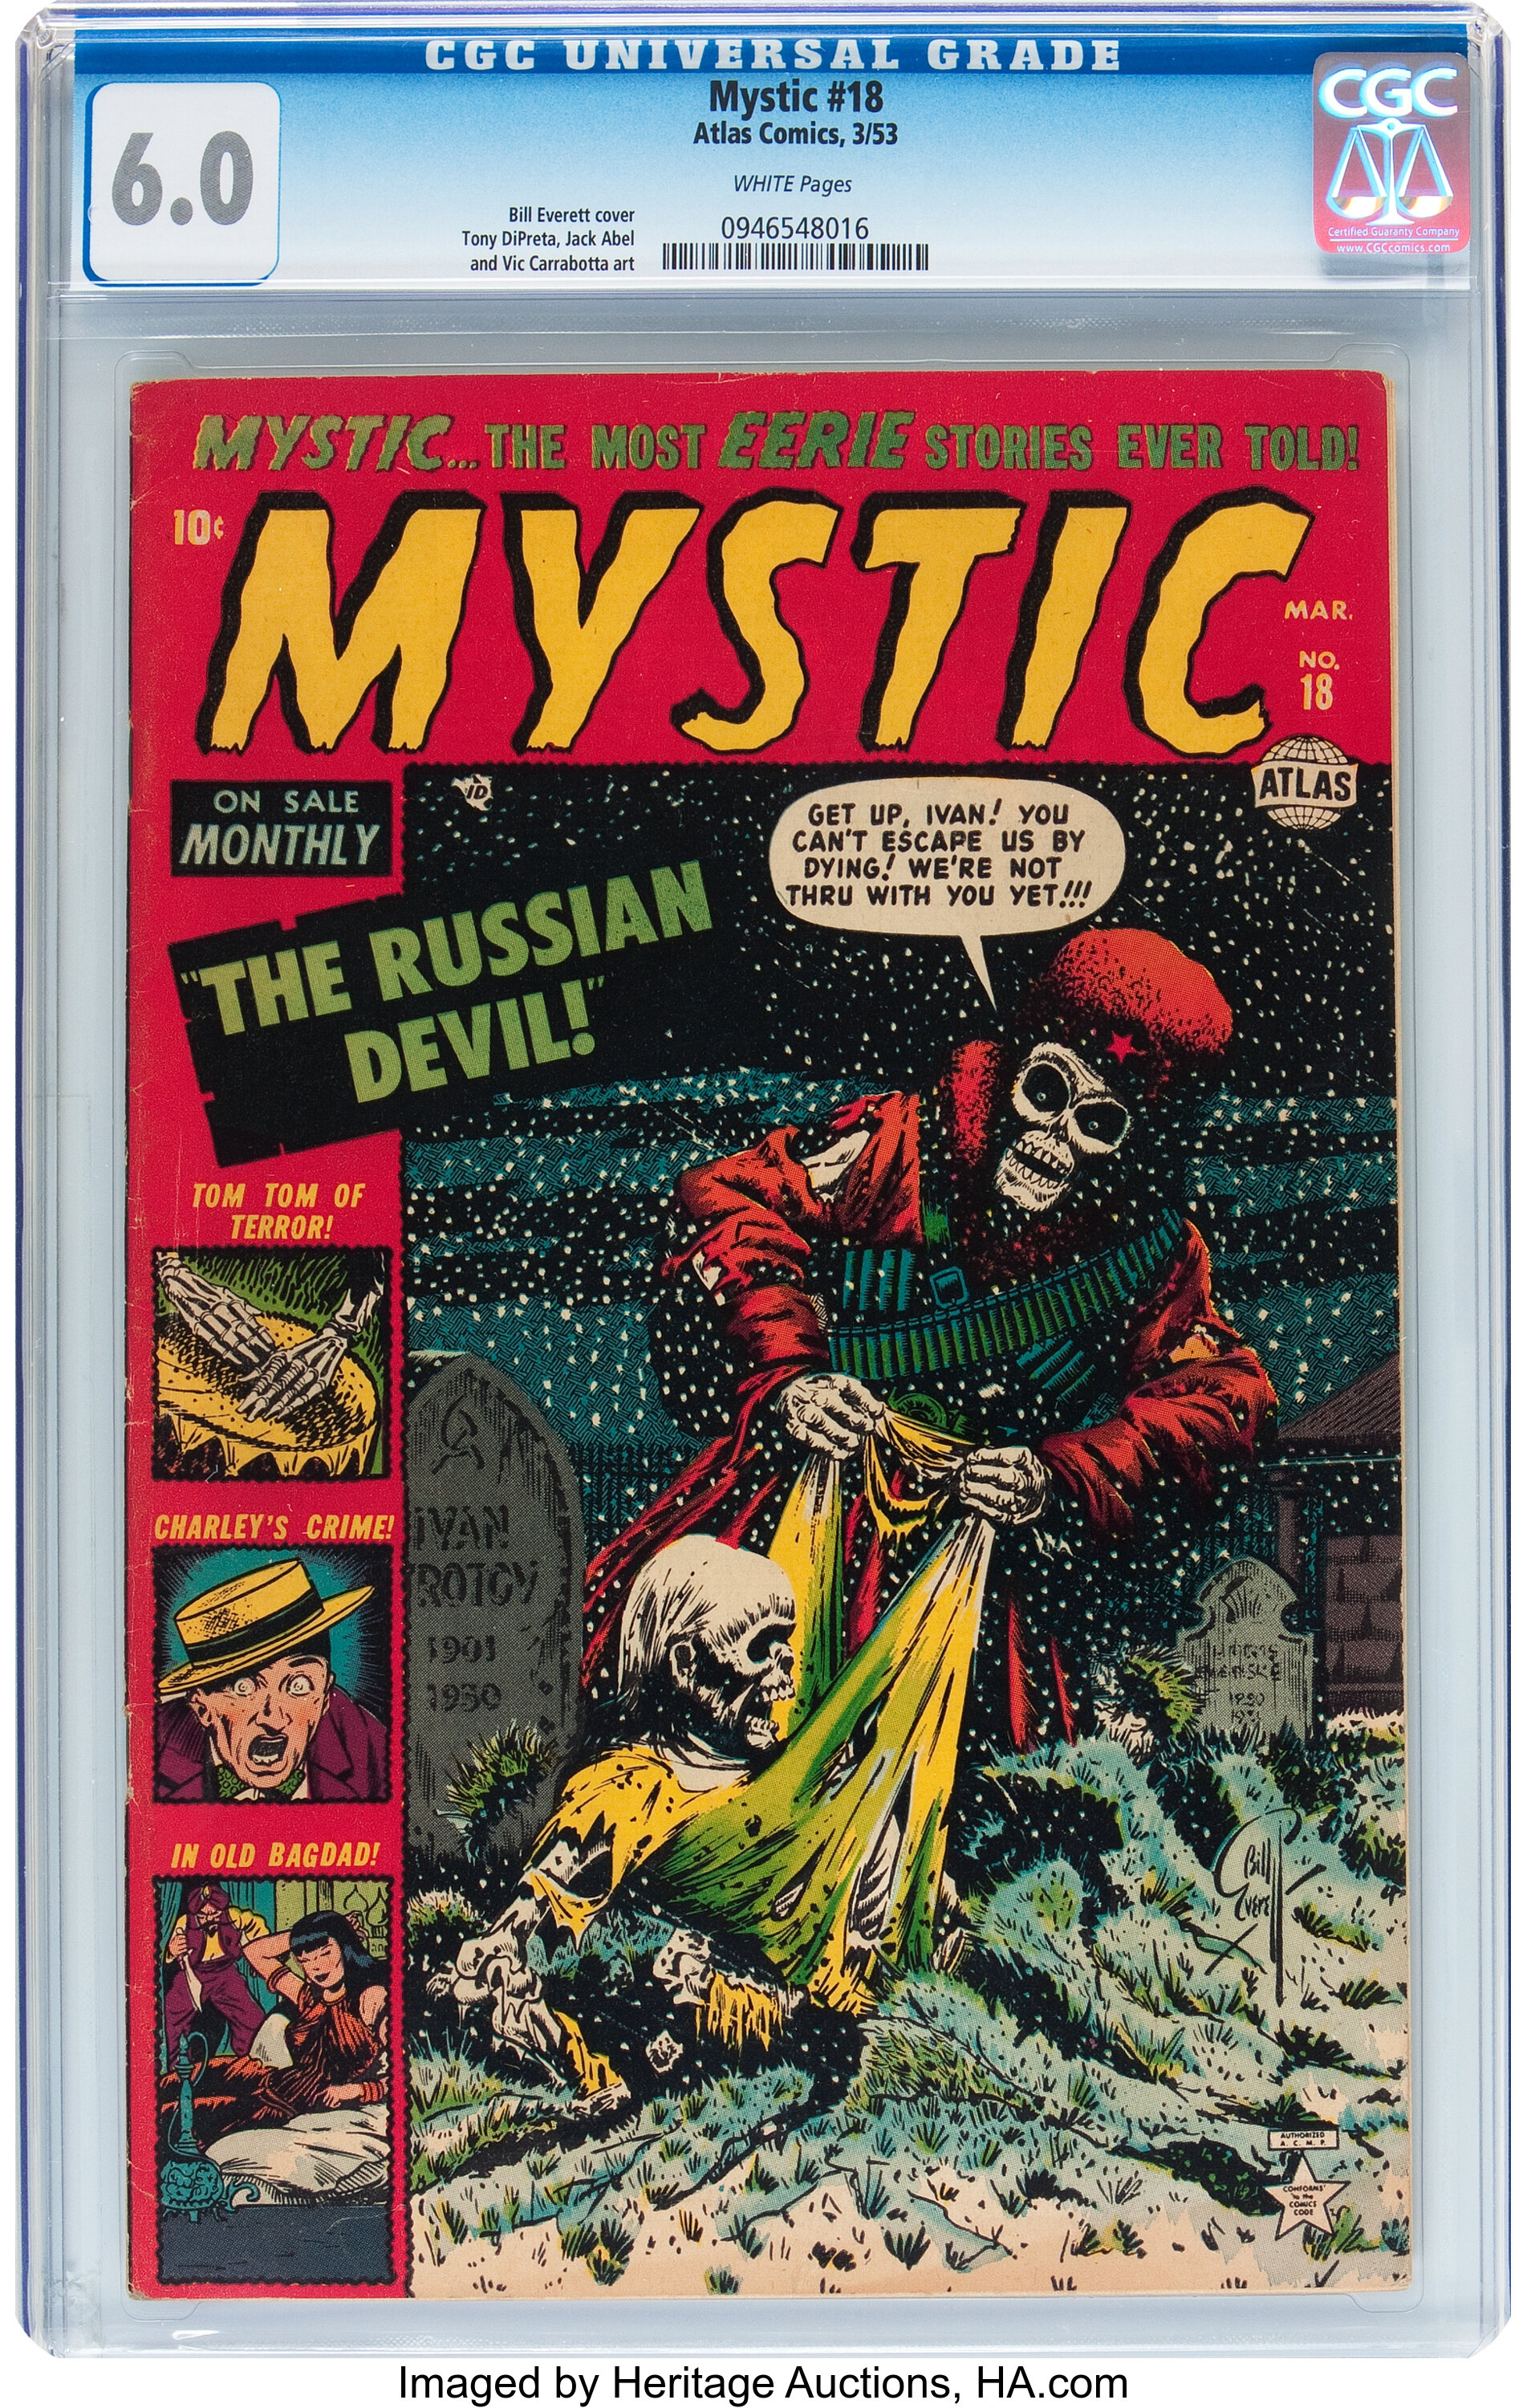 Mystic #18 (Atlas, 1953) CGC FN 6.0 White pages.... Golden Age | Lot #14394  | Heritage Auctions